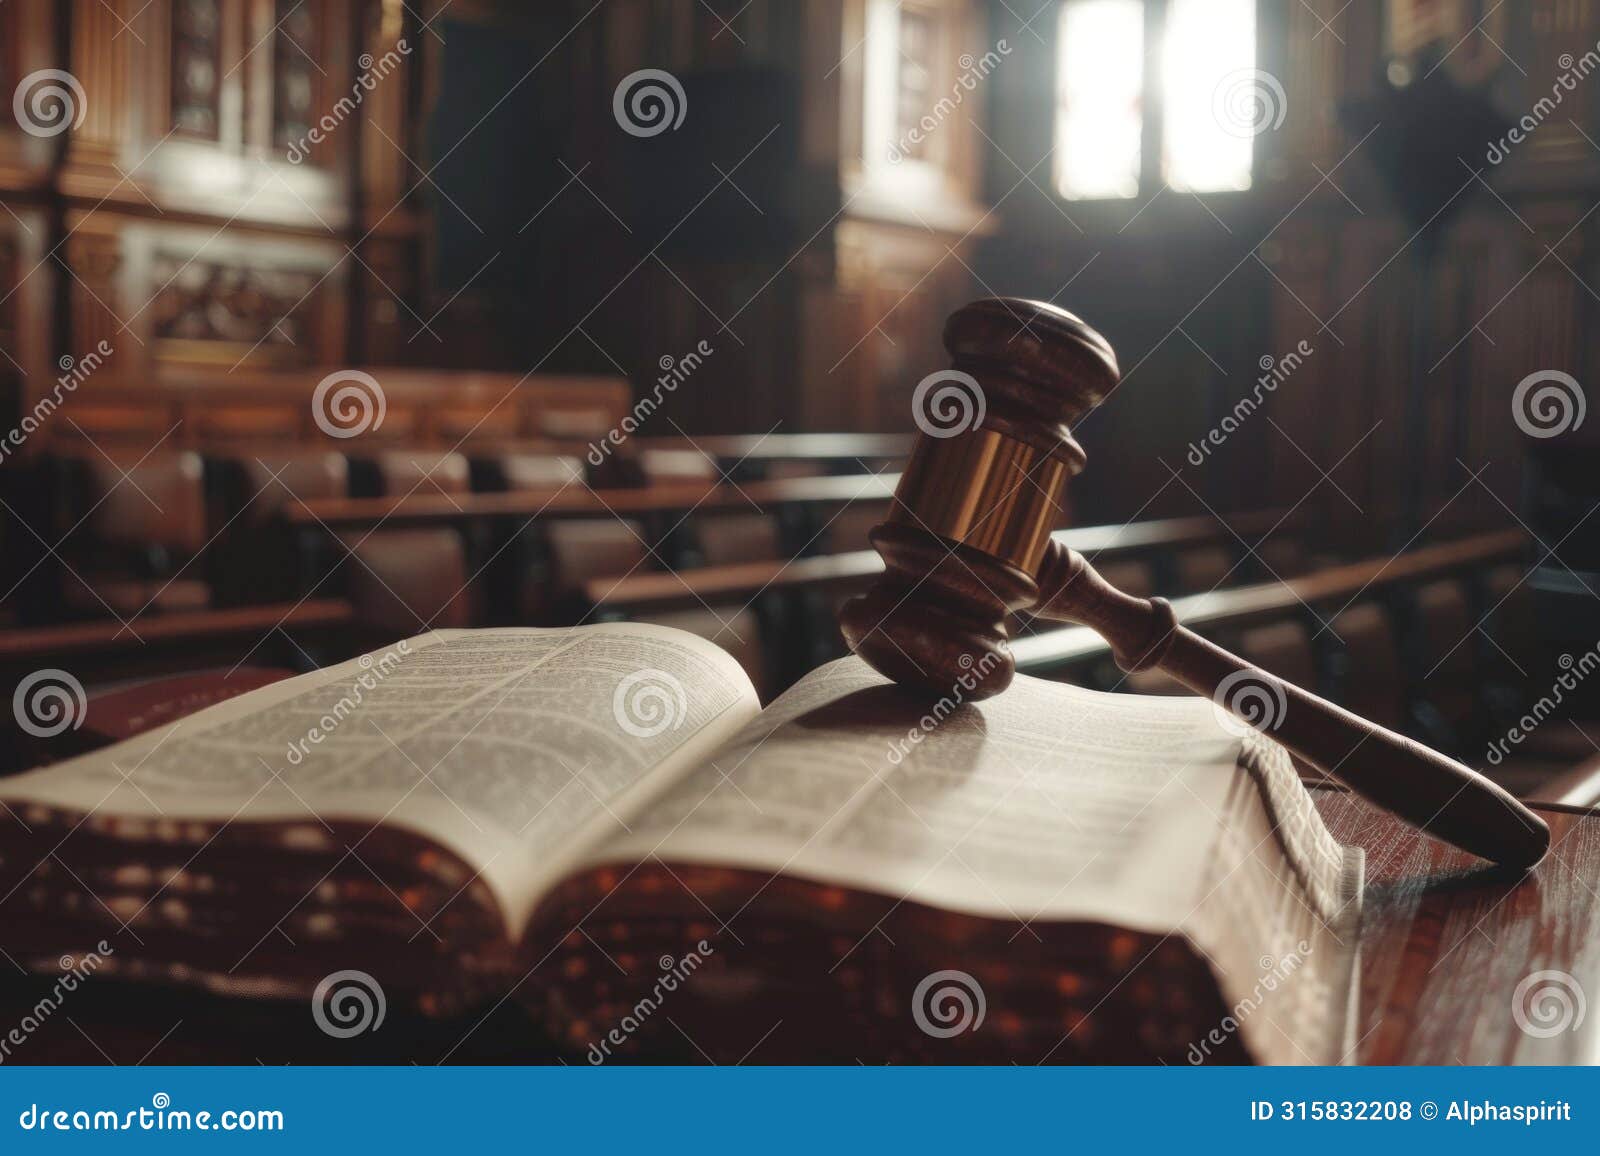 wooden gavel sits on top of an open law book in a courtroom, izing legal authority and justice